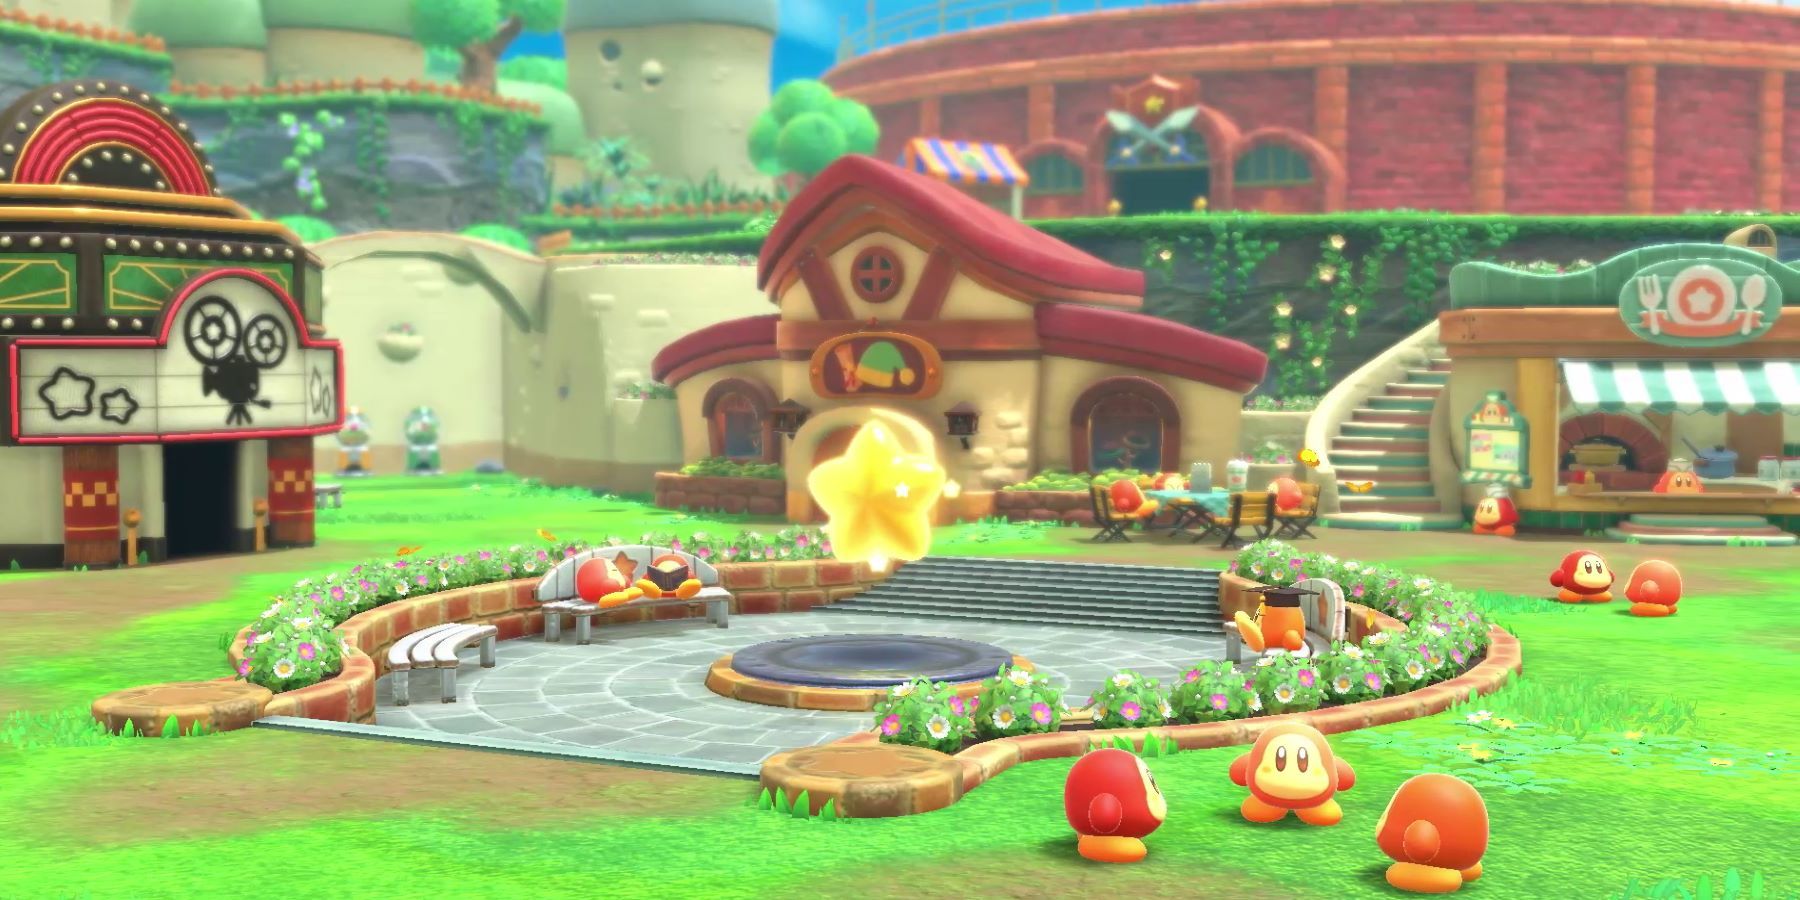 Kirby and the Forgotten Land's Waddle Dee Town, with a movie theater, restaurant, battle arena, Warp Star, and many Waddle Dees visible